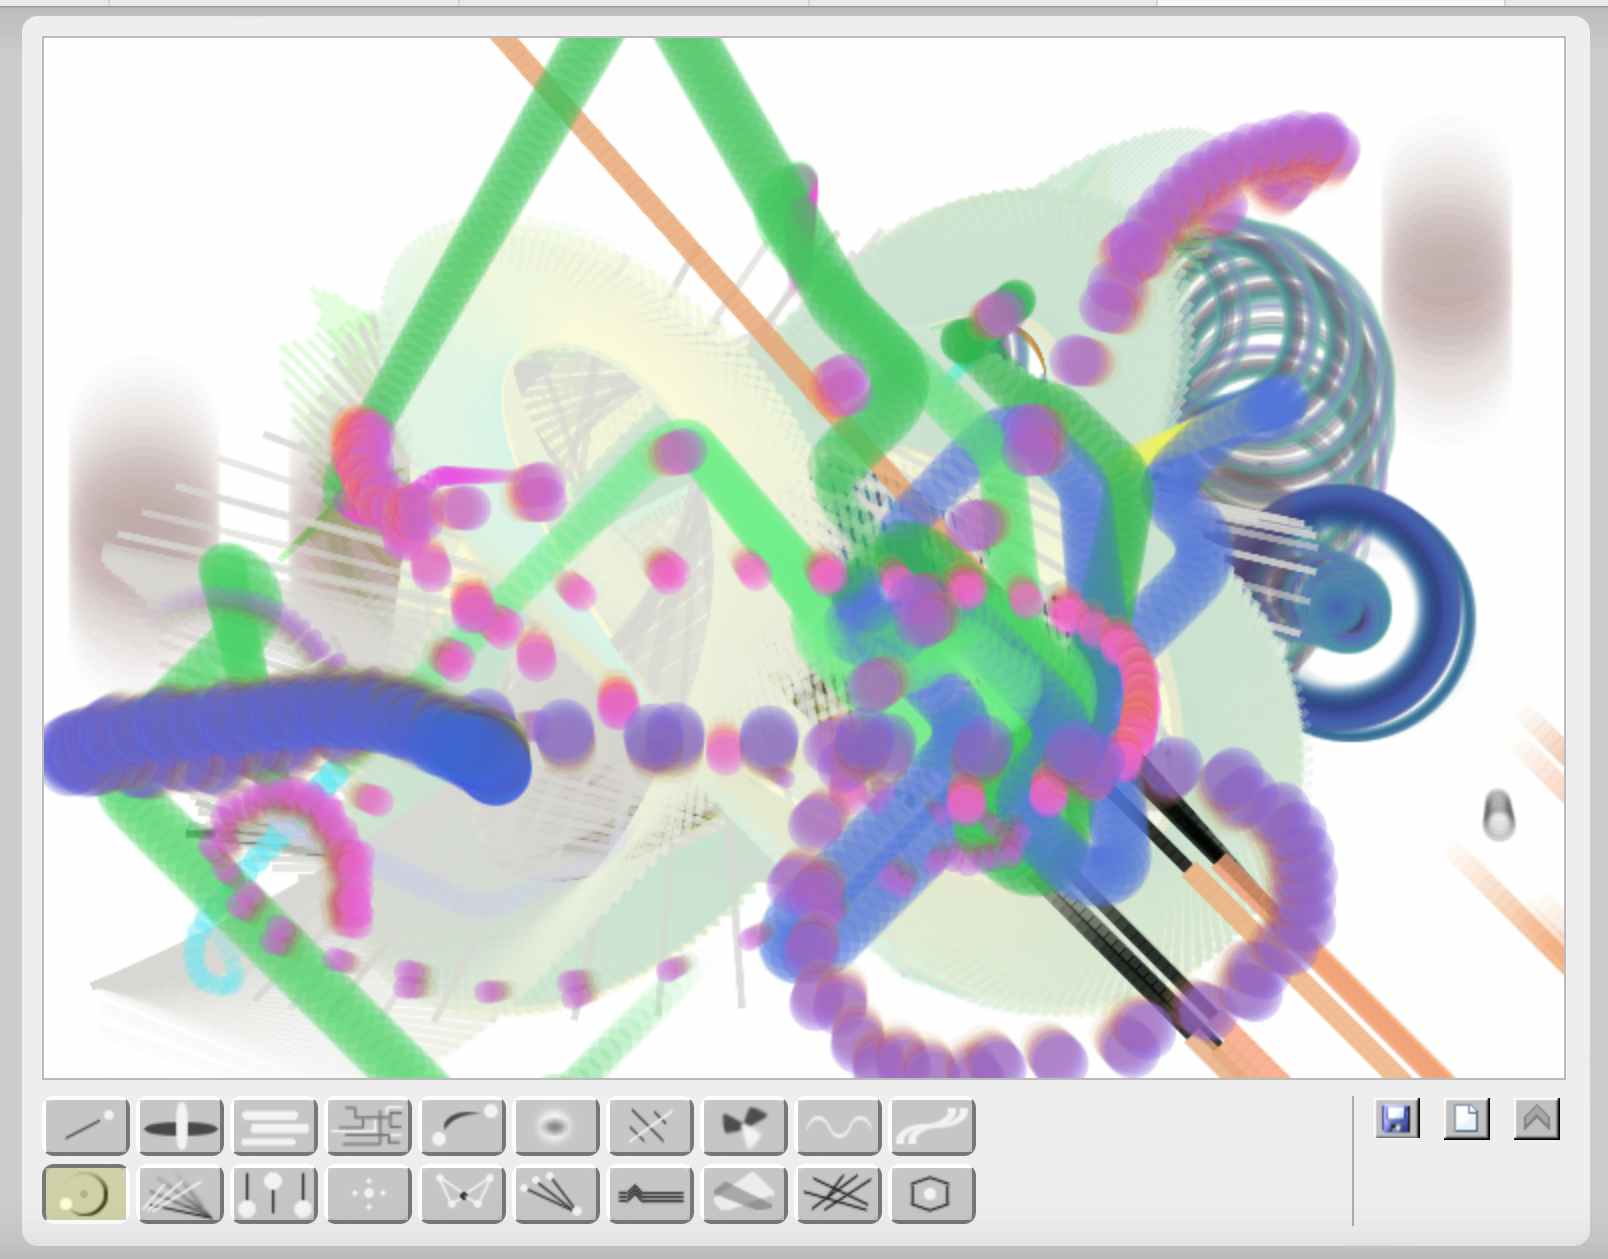 A screenshot of the Bomomo website with an abstract painting and paint tools at the bottom for kids art games.